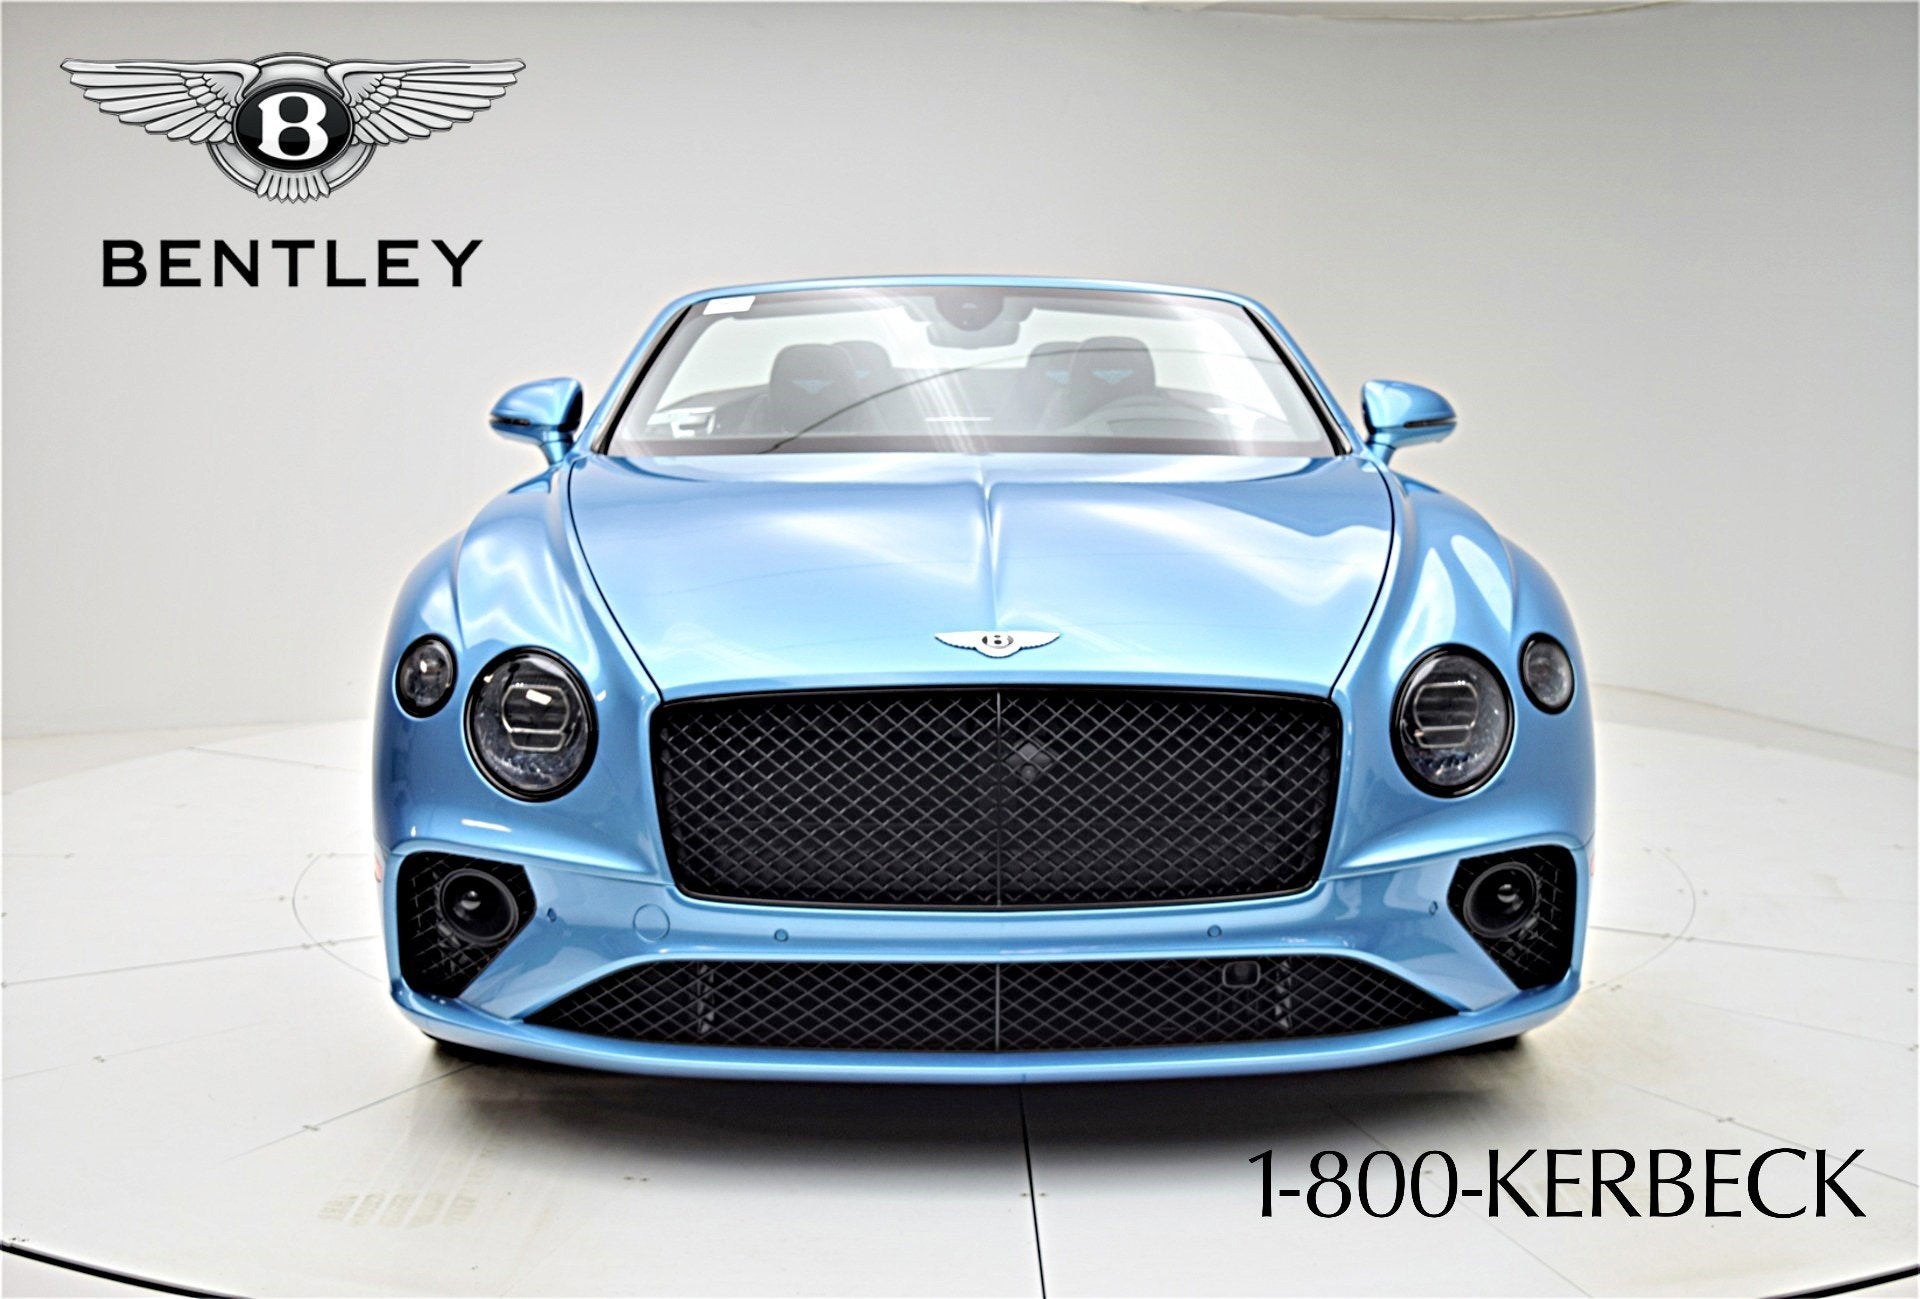 2022 Bentley Continental V8/LEASE OPTIONS AVAILABLE